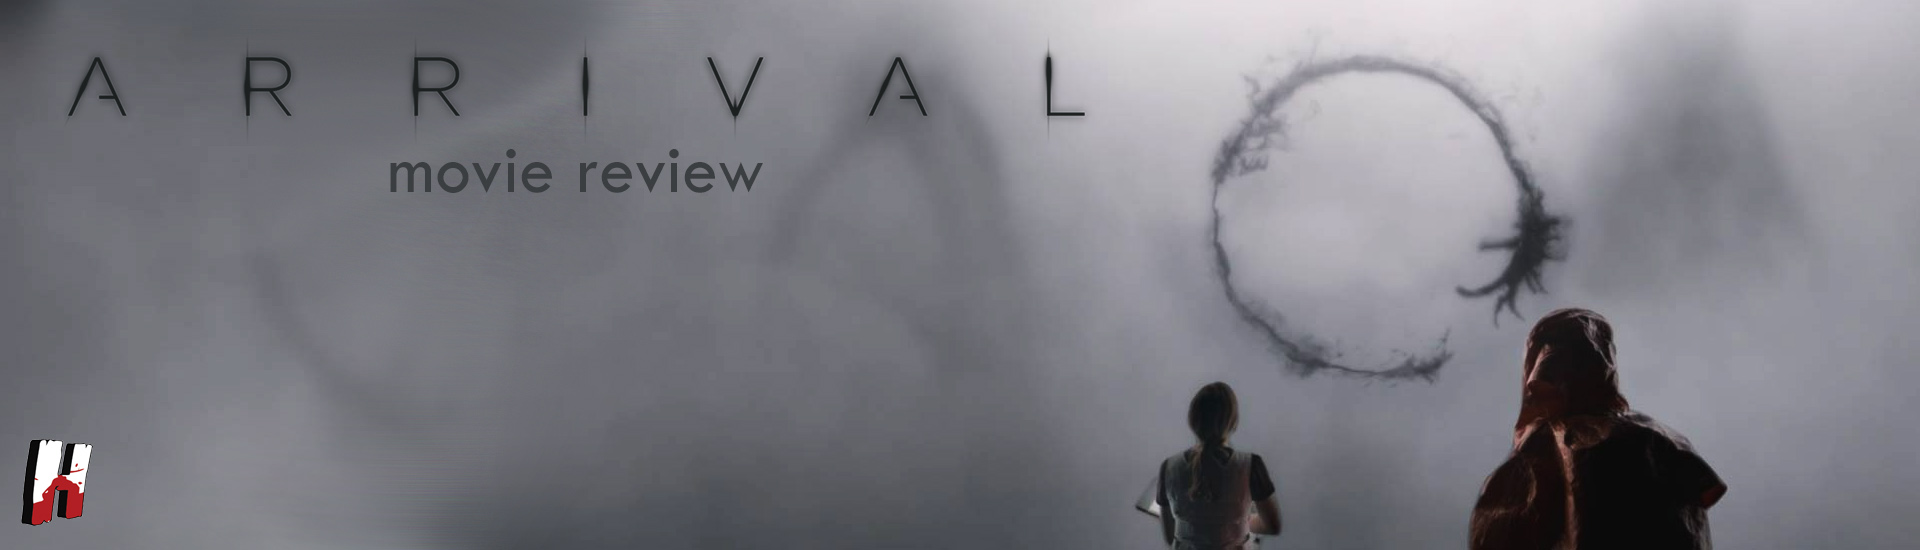 Arrival (2016) Movie Review and Analysis